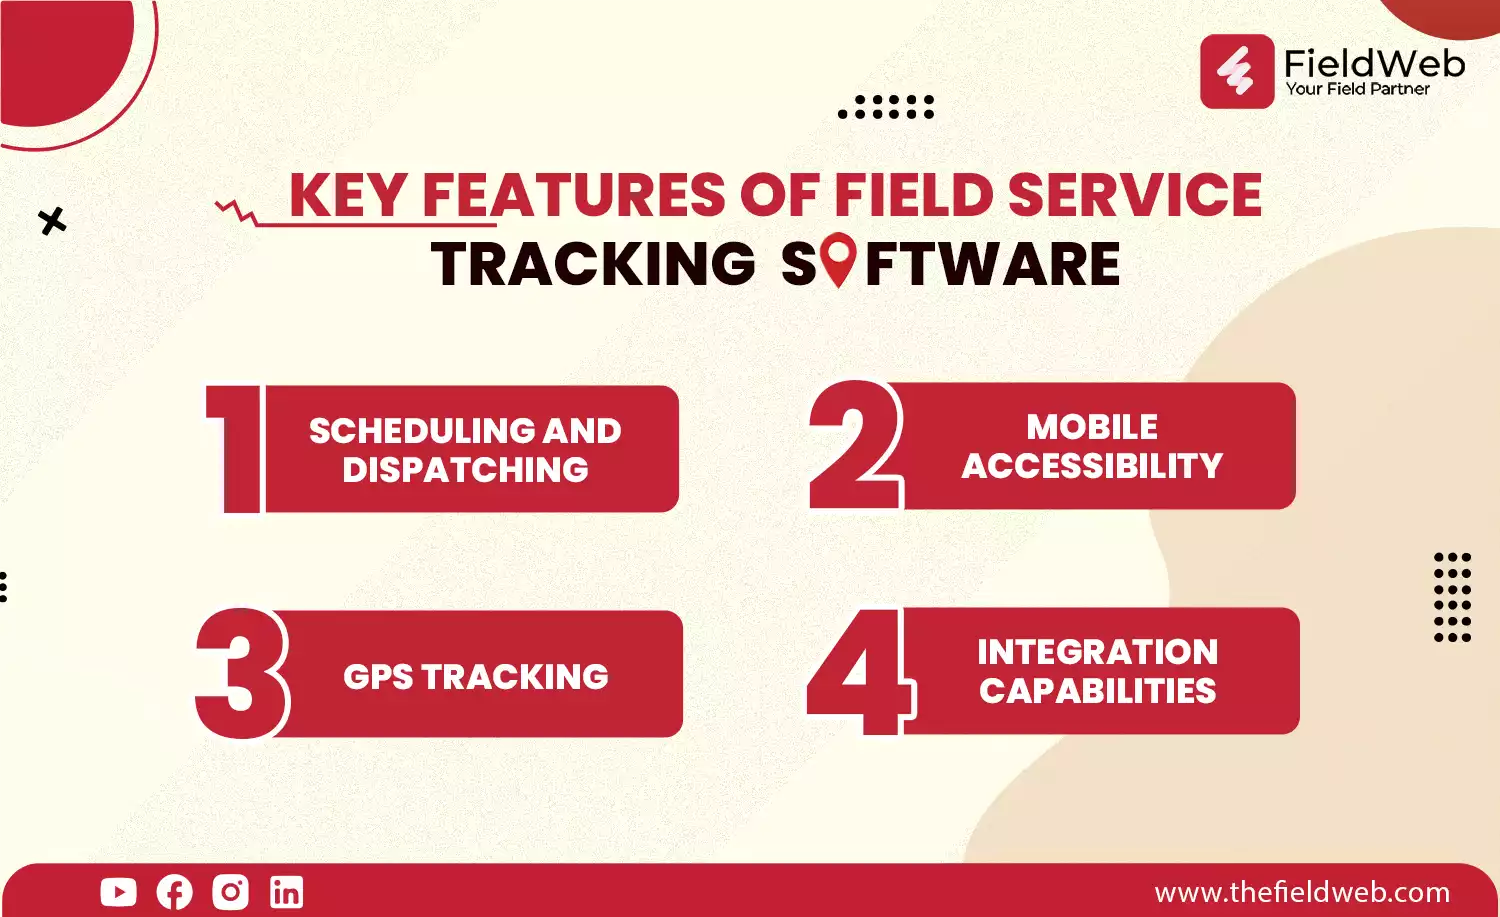 image displaying 4 key features of field service tracking software